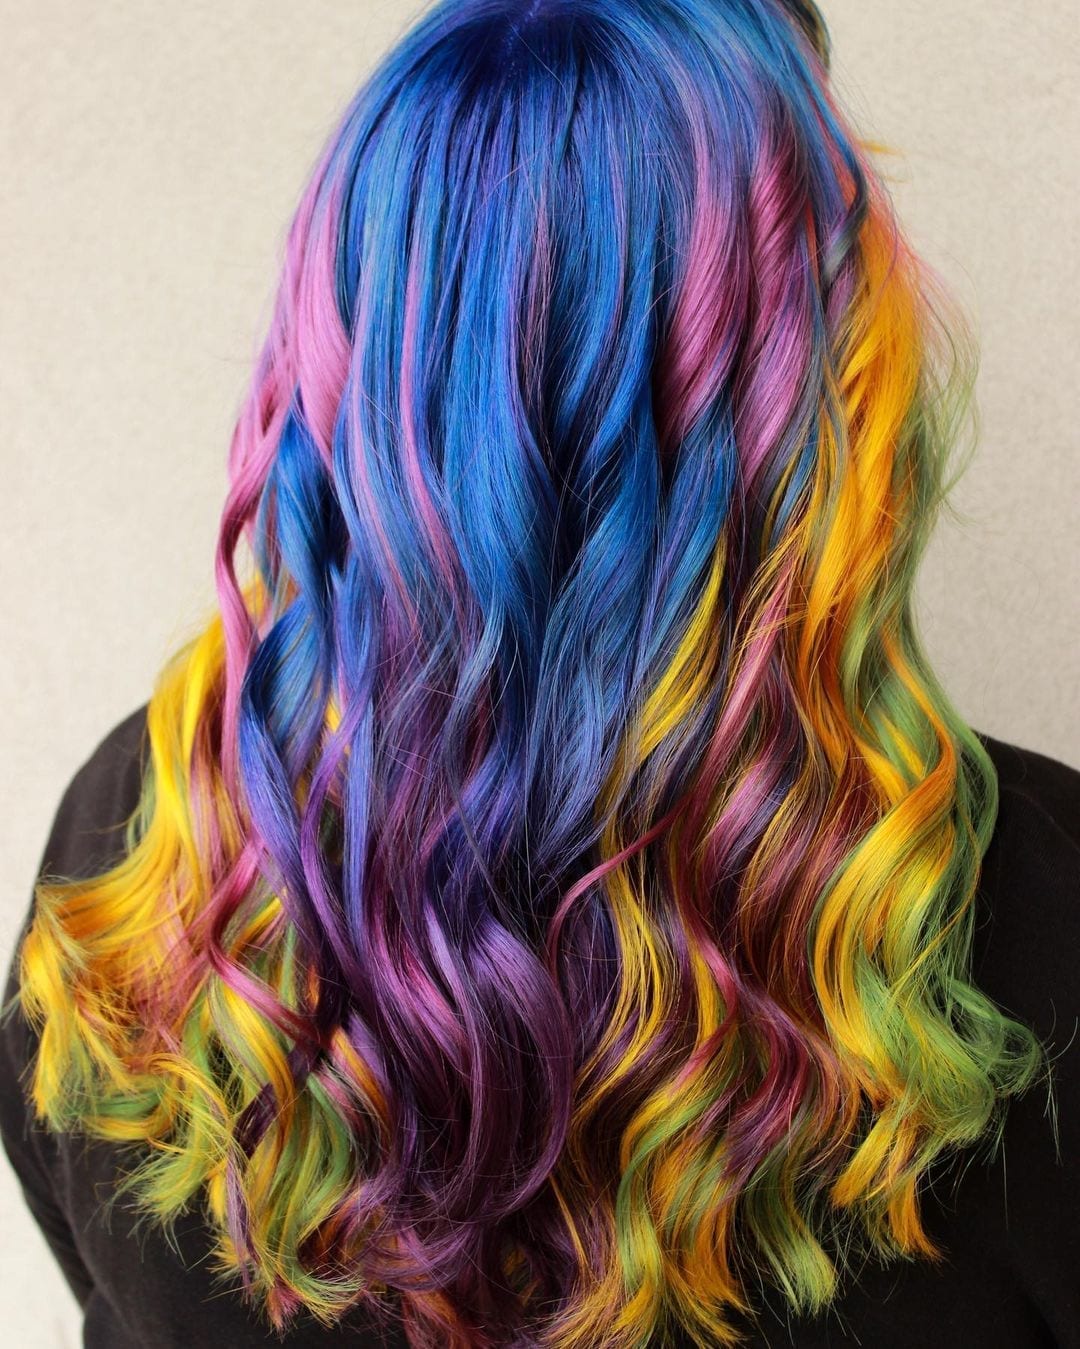 Girl with trix-inspired hair that looks like a rainbow and is very unprofessional looks away from the camera